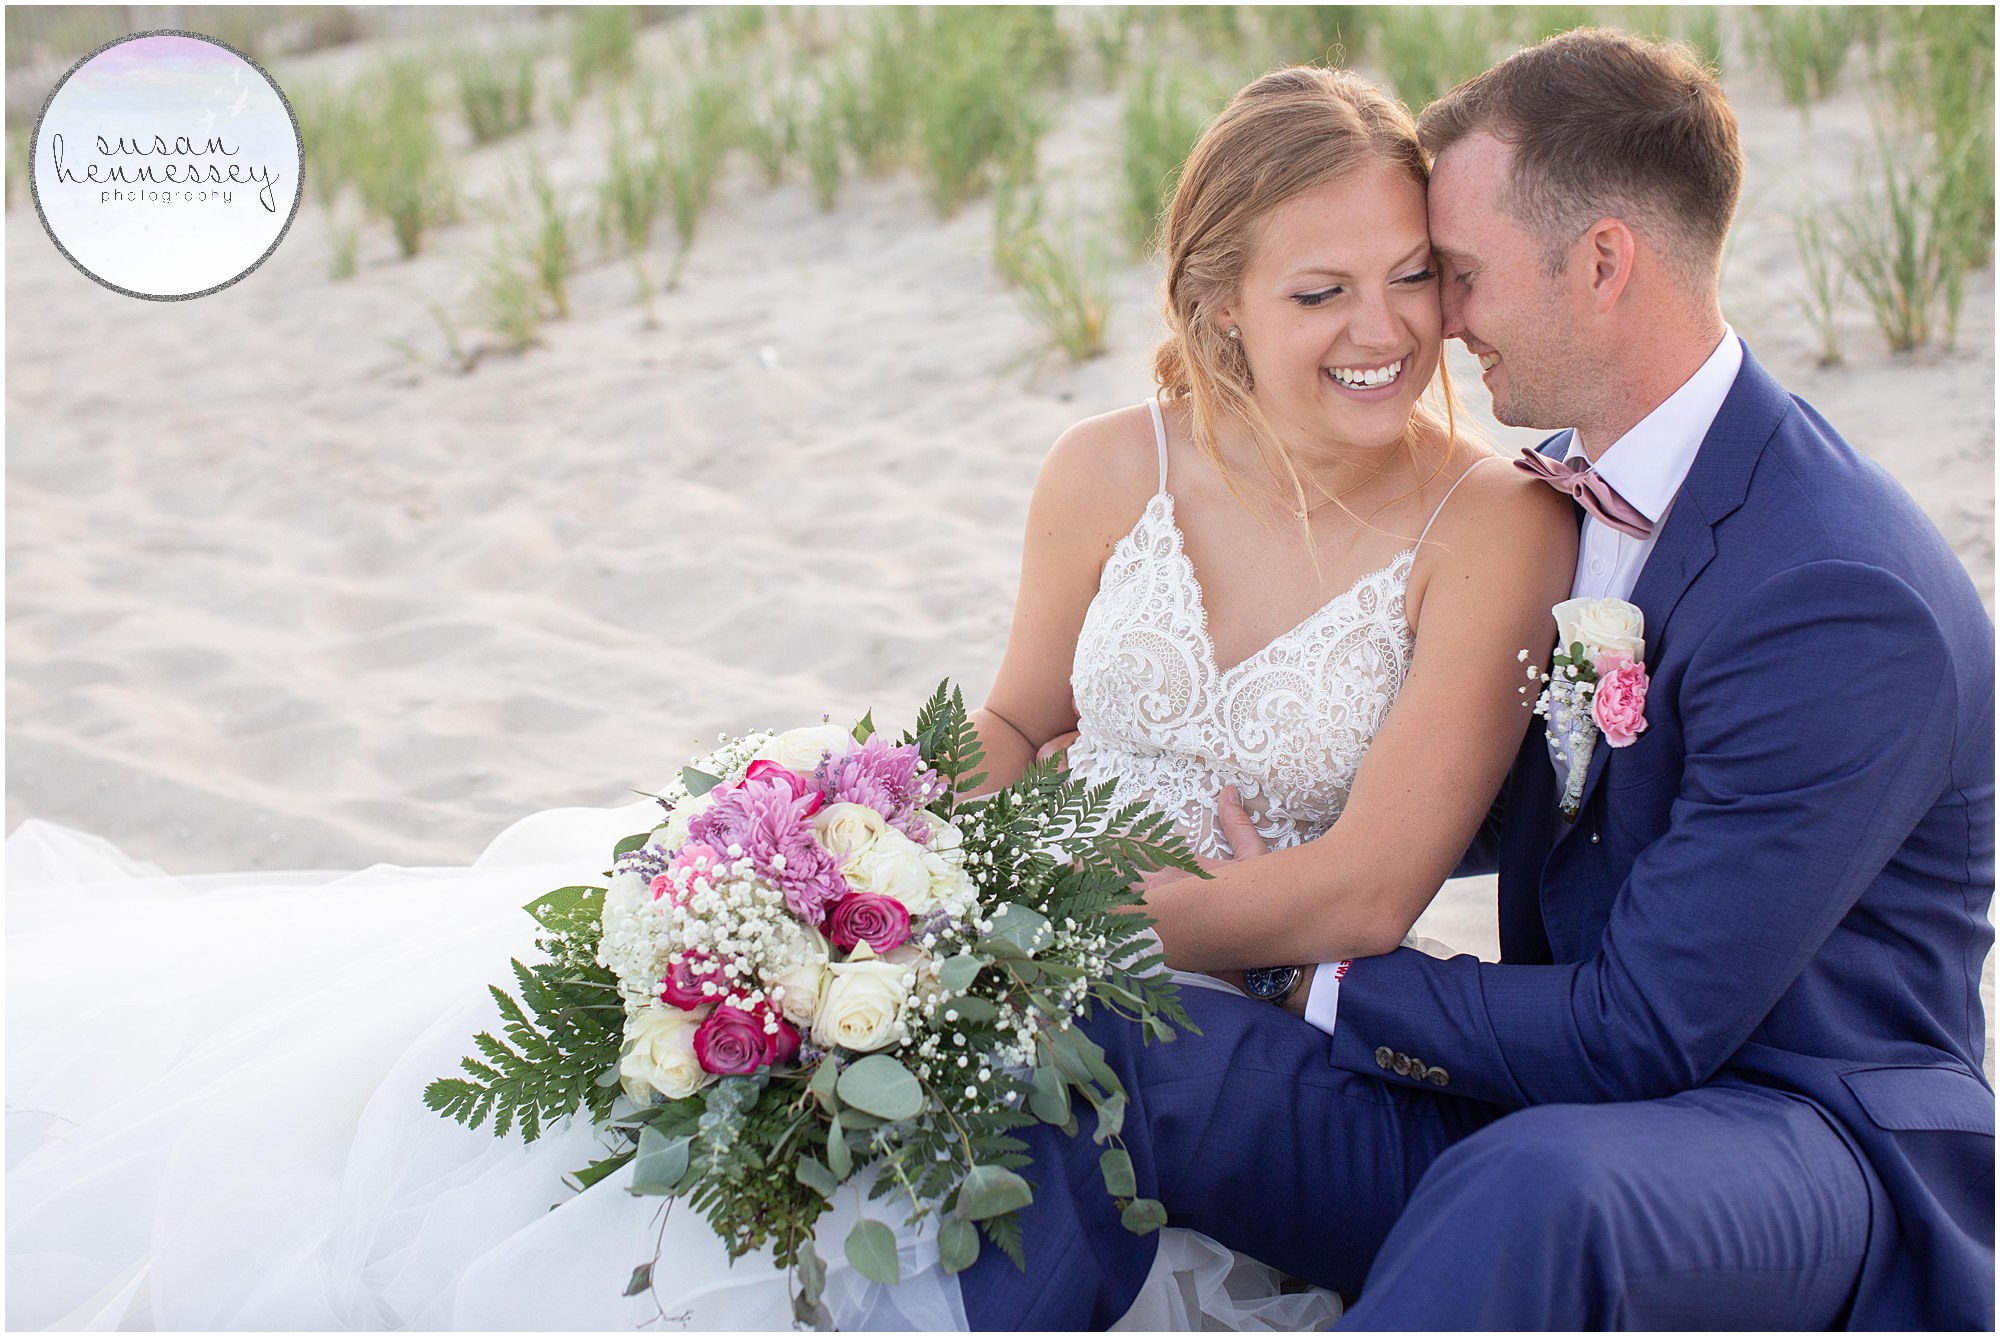 A couple laughs in the sand at Summer beach wedding